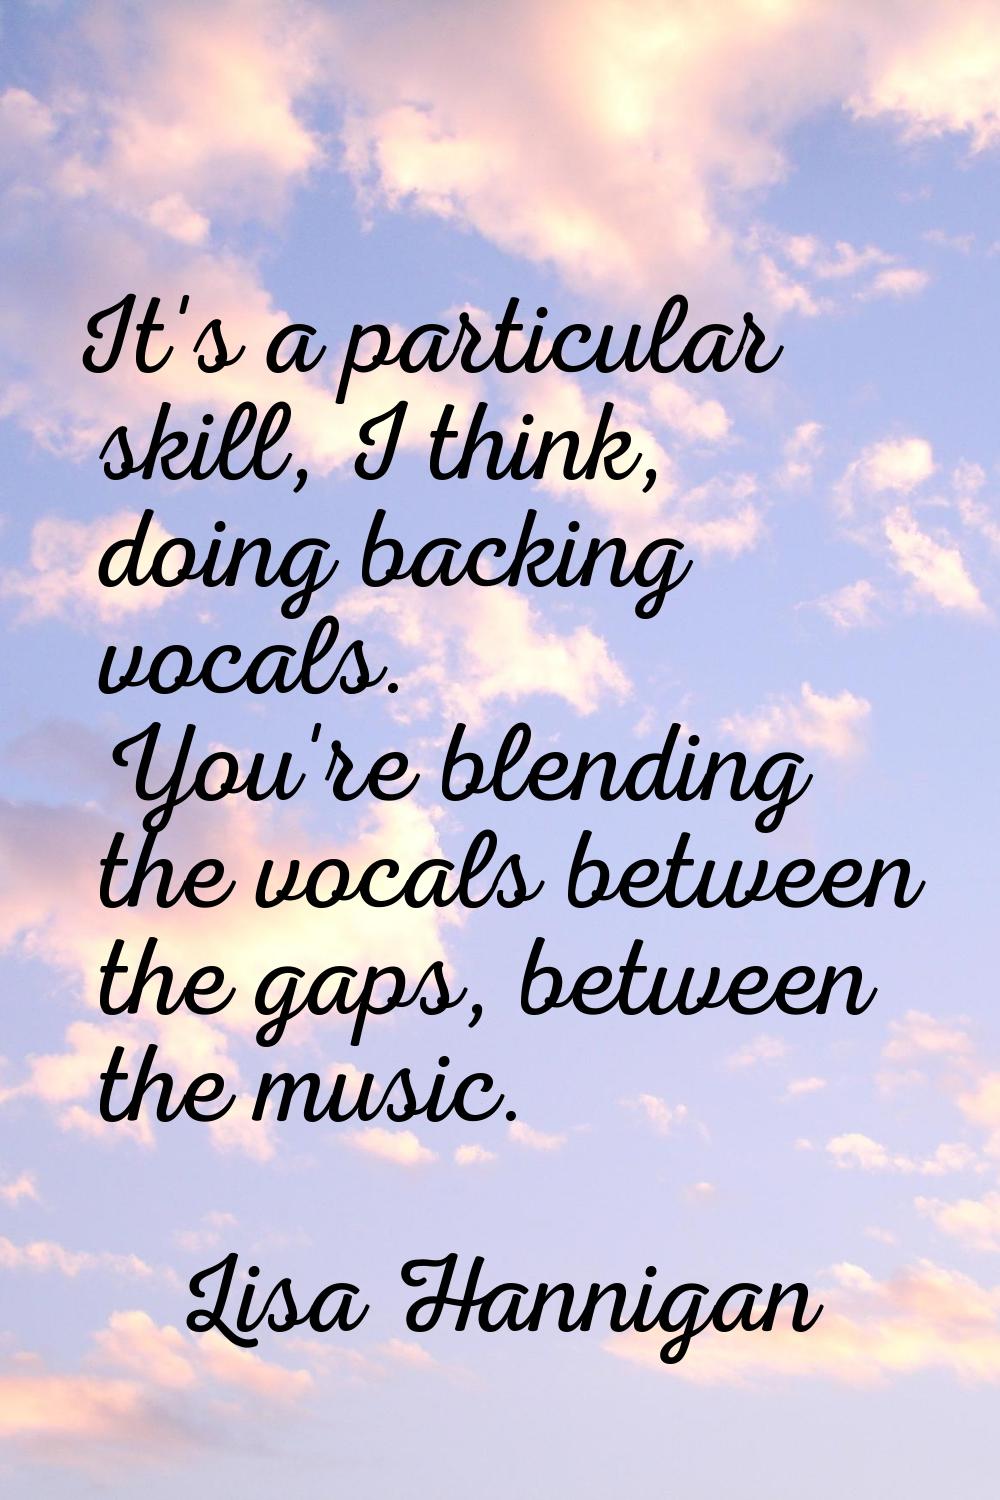 It's a particular skill, I think, doing backing vocals. You're blending the vocals between the gaps